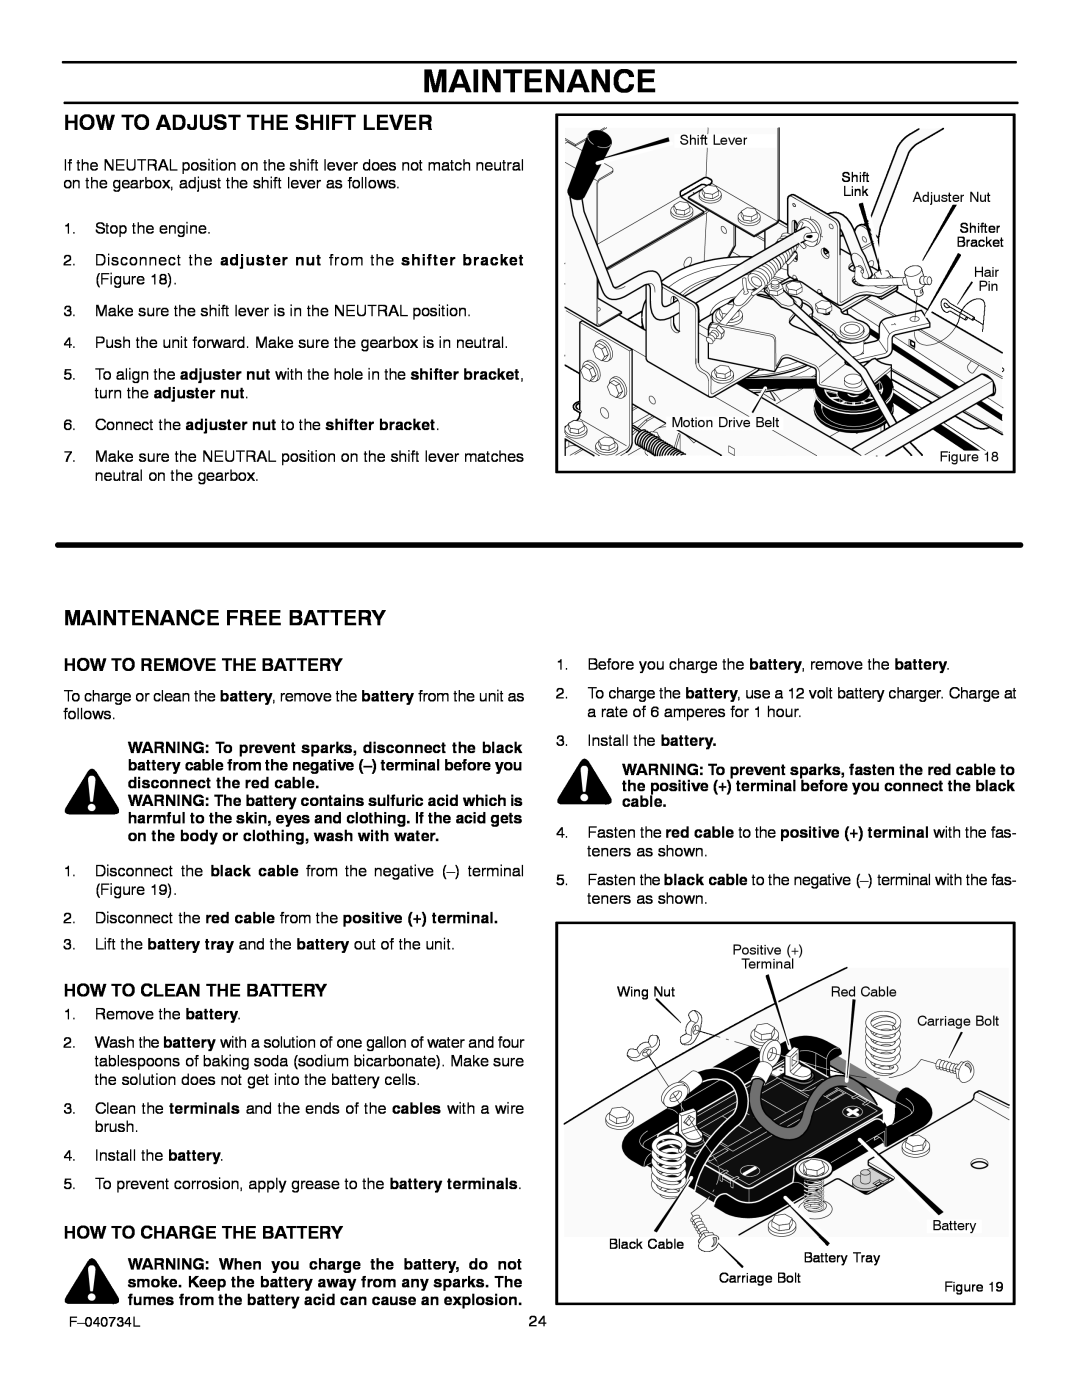 Murray 425015x92A manual How To Adjust The Shift Lever, Maintenance Free Battery, How To Remove The Battery 